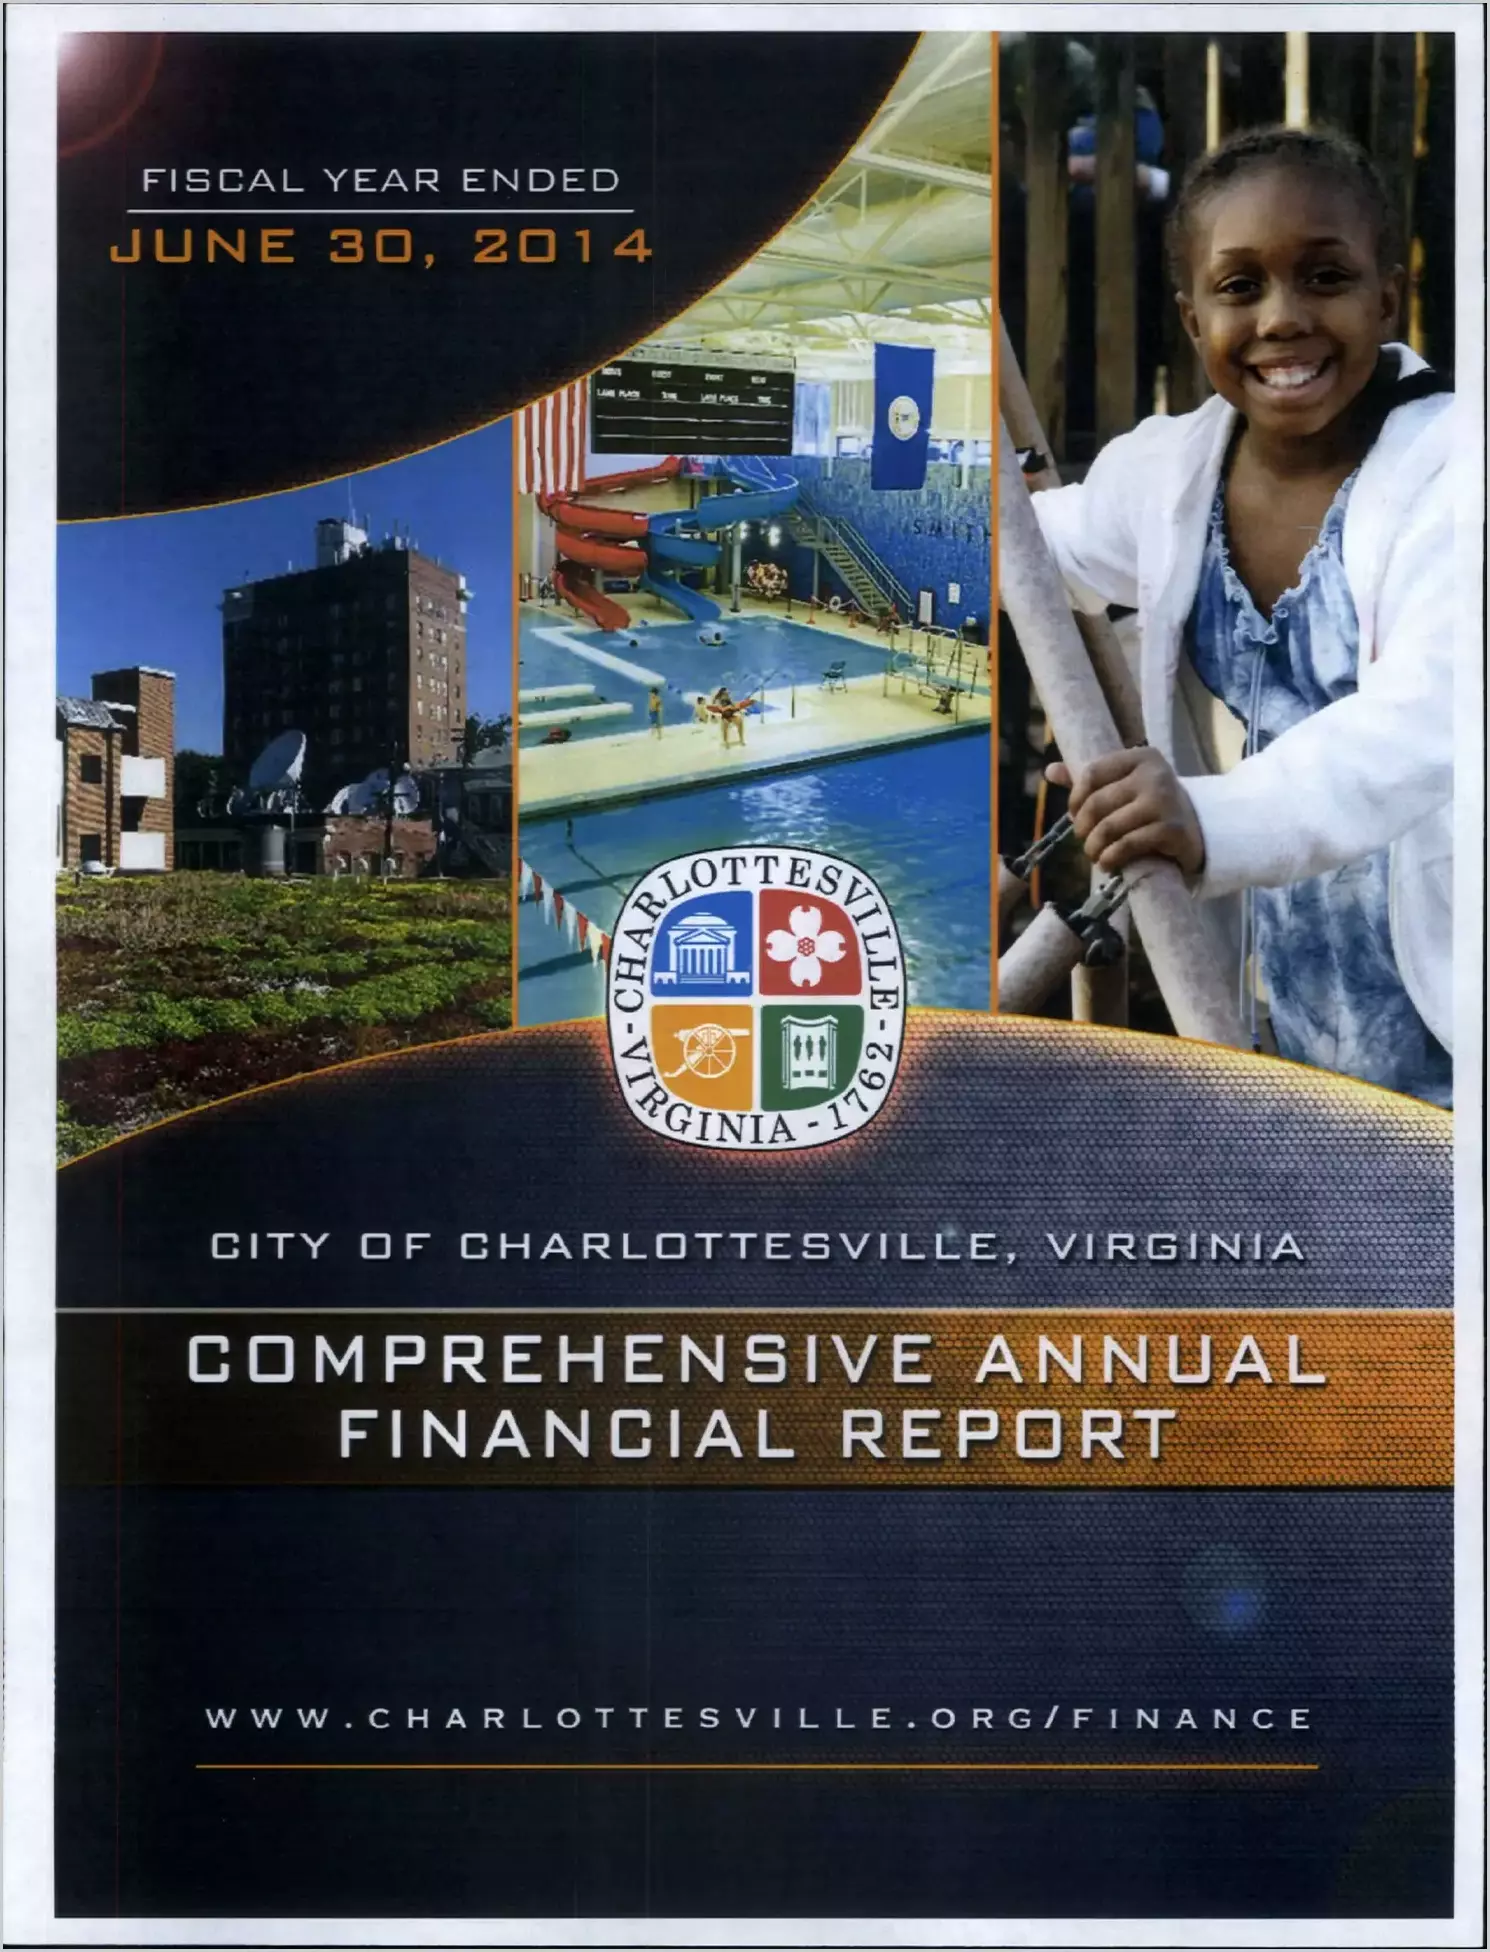 2014 Annual Financial Report for City of Charlottesville